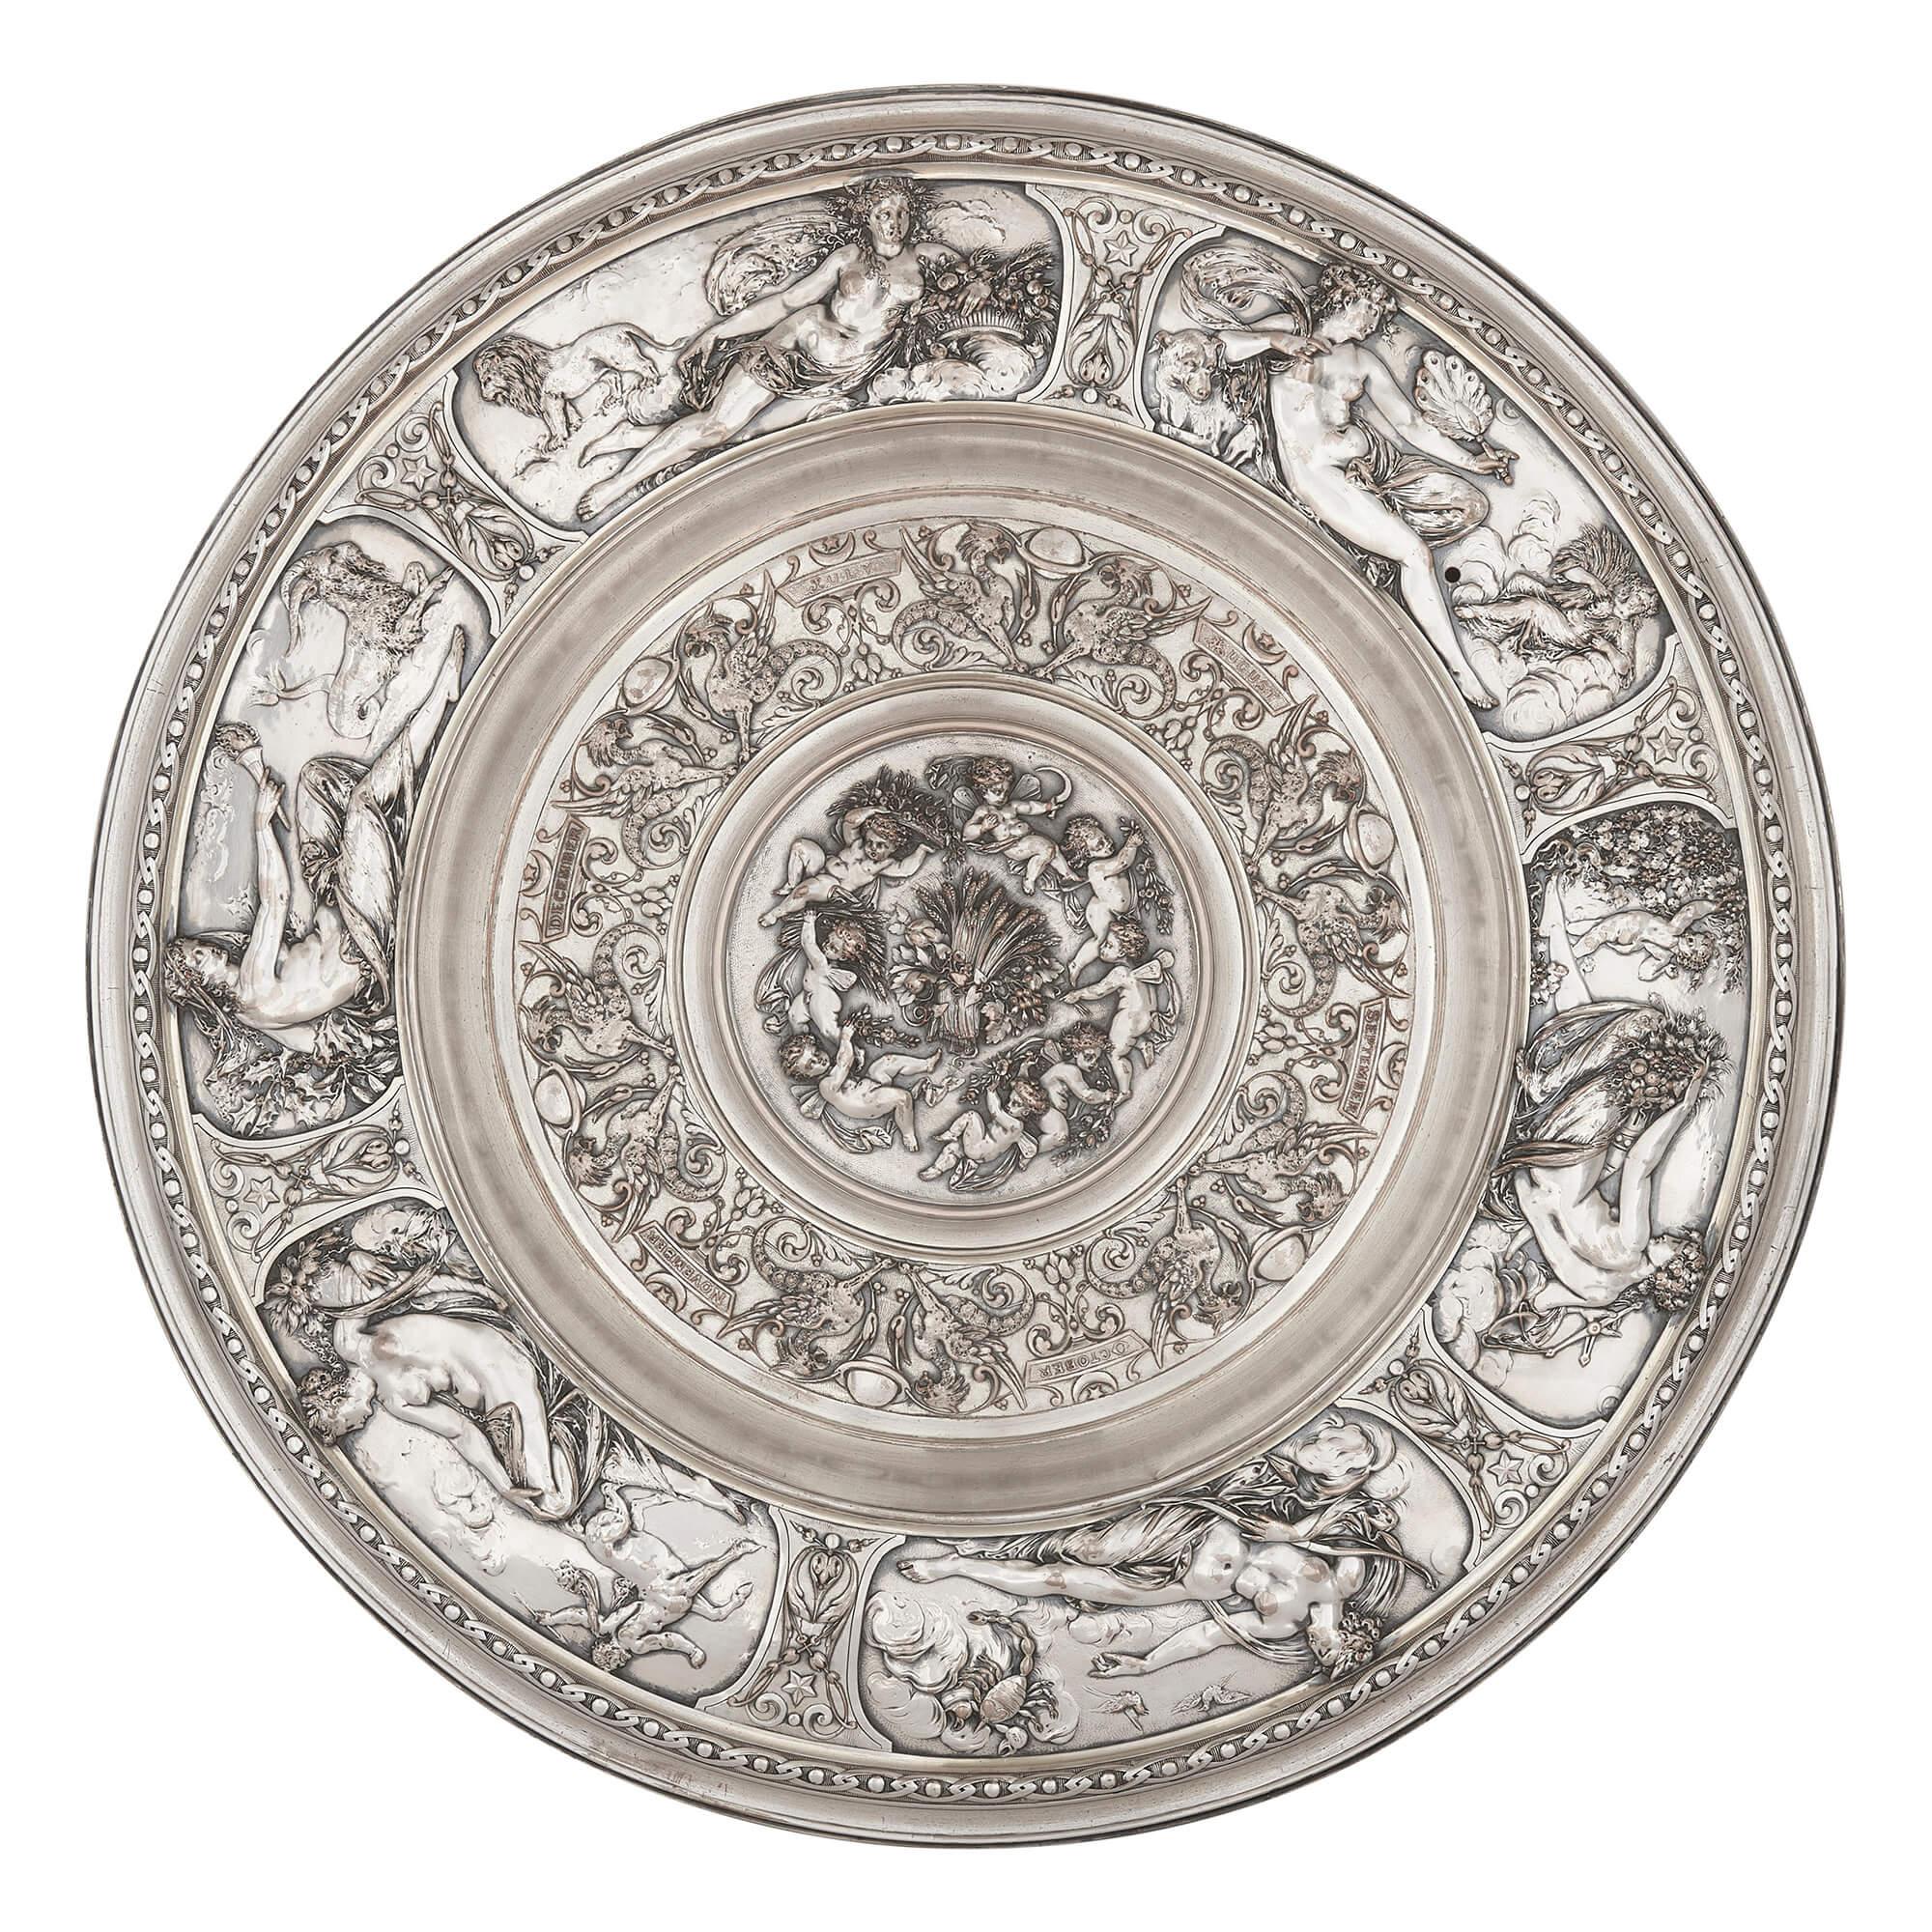 Elkington & Co. pair of silver-plated chargers of The Seasons
English, circa 1870
Height 4cm, diameter 54cm

These exquisite decorative silver-plated, or electrotype, chargers were manufactured by the highly renowned Victorian silversmiths,